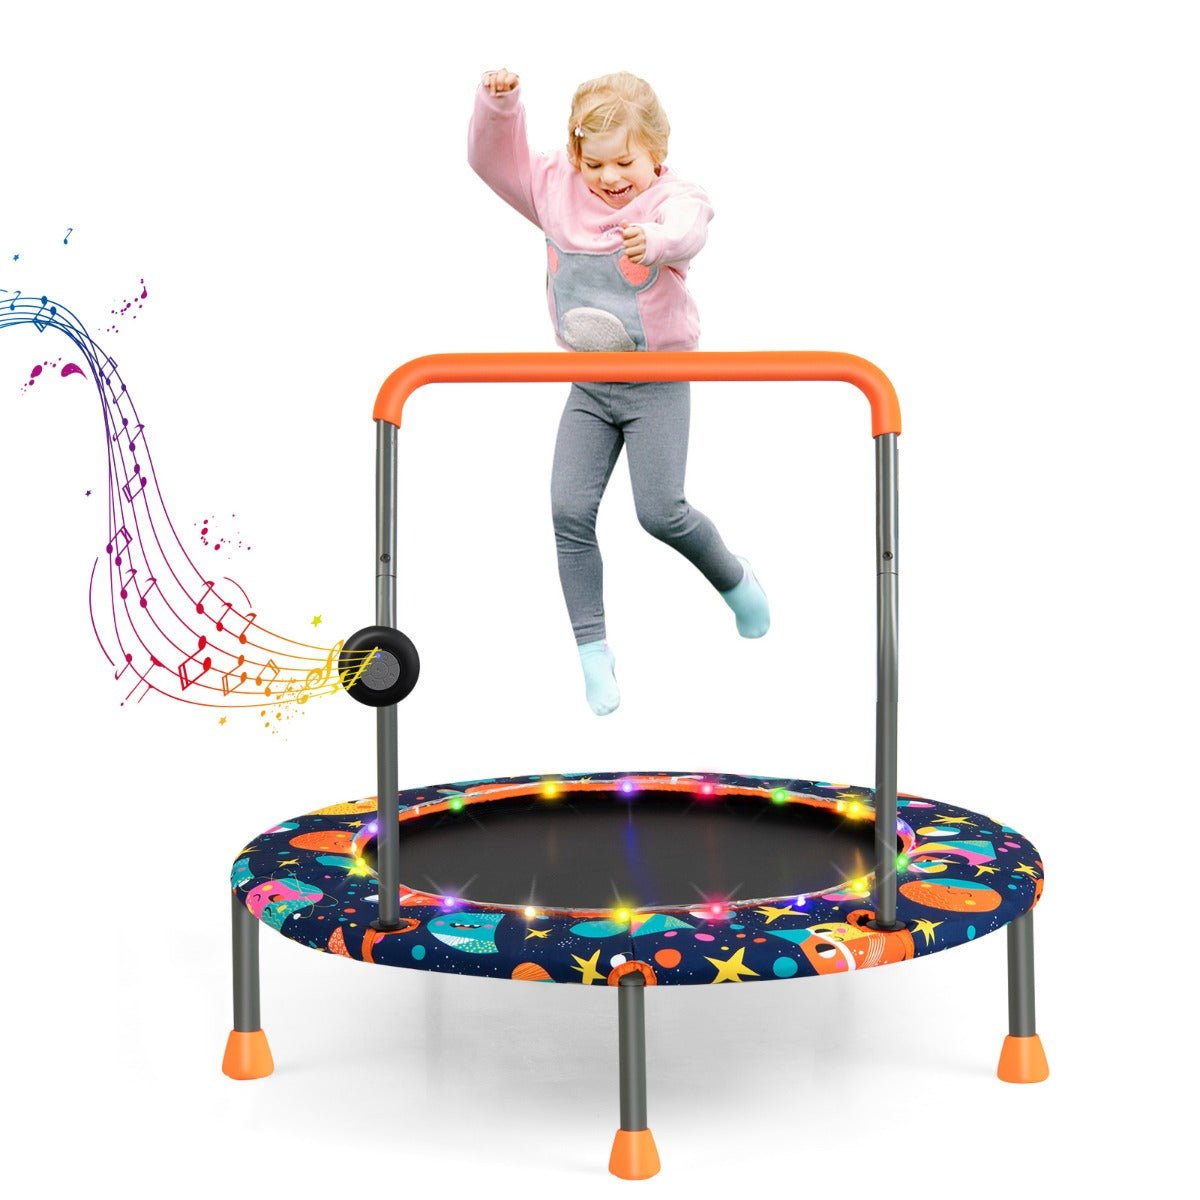 Musical Fun: Toddler Trampoline with colourful LED Lights and Music